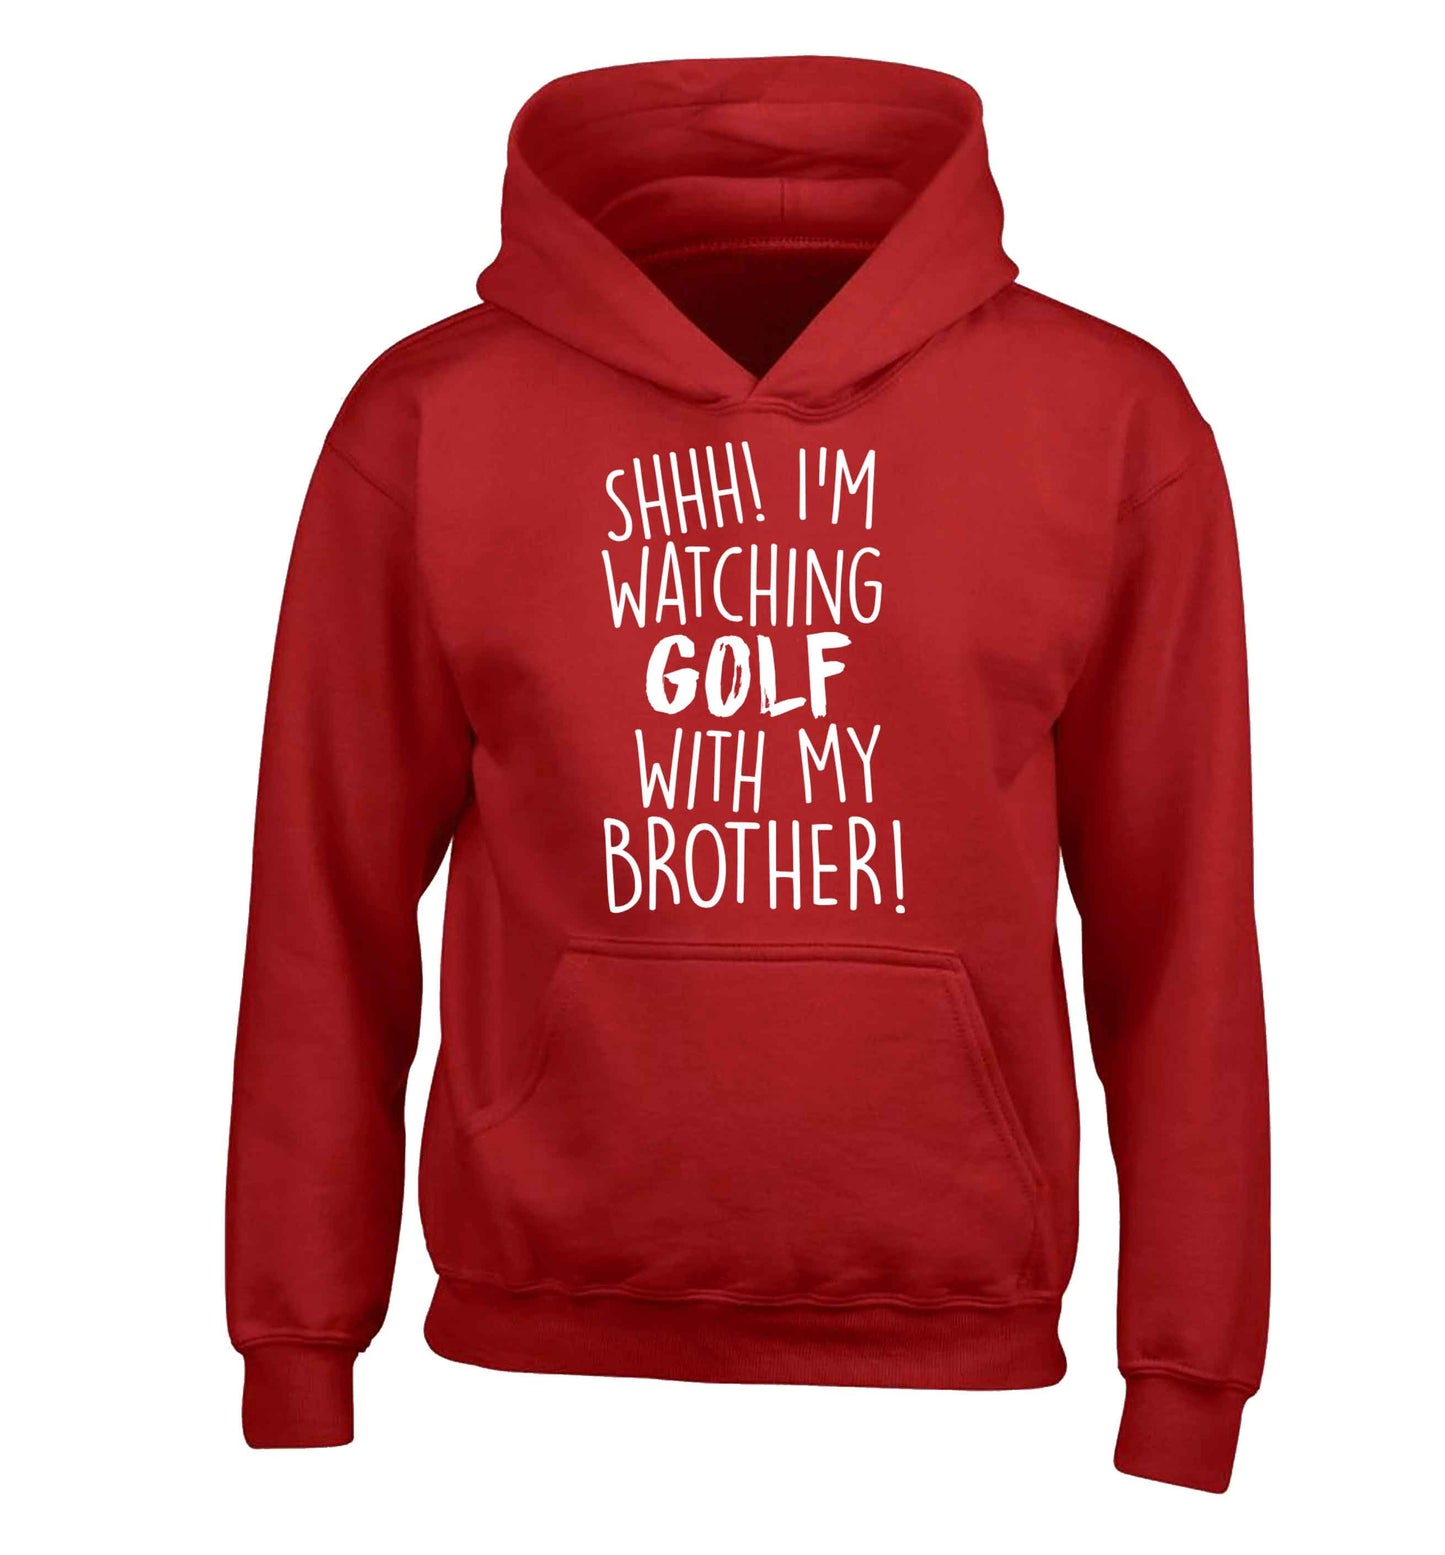 Shh I'm watching golf with my brother children's red hoodie 12-13 Years